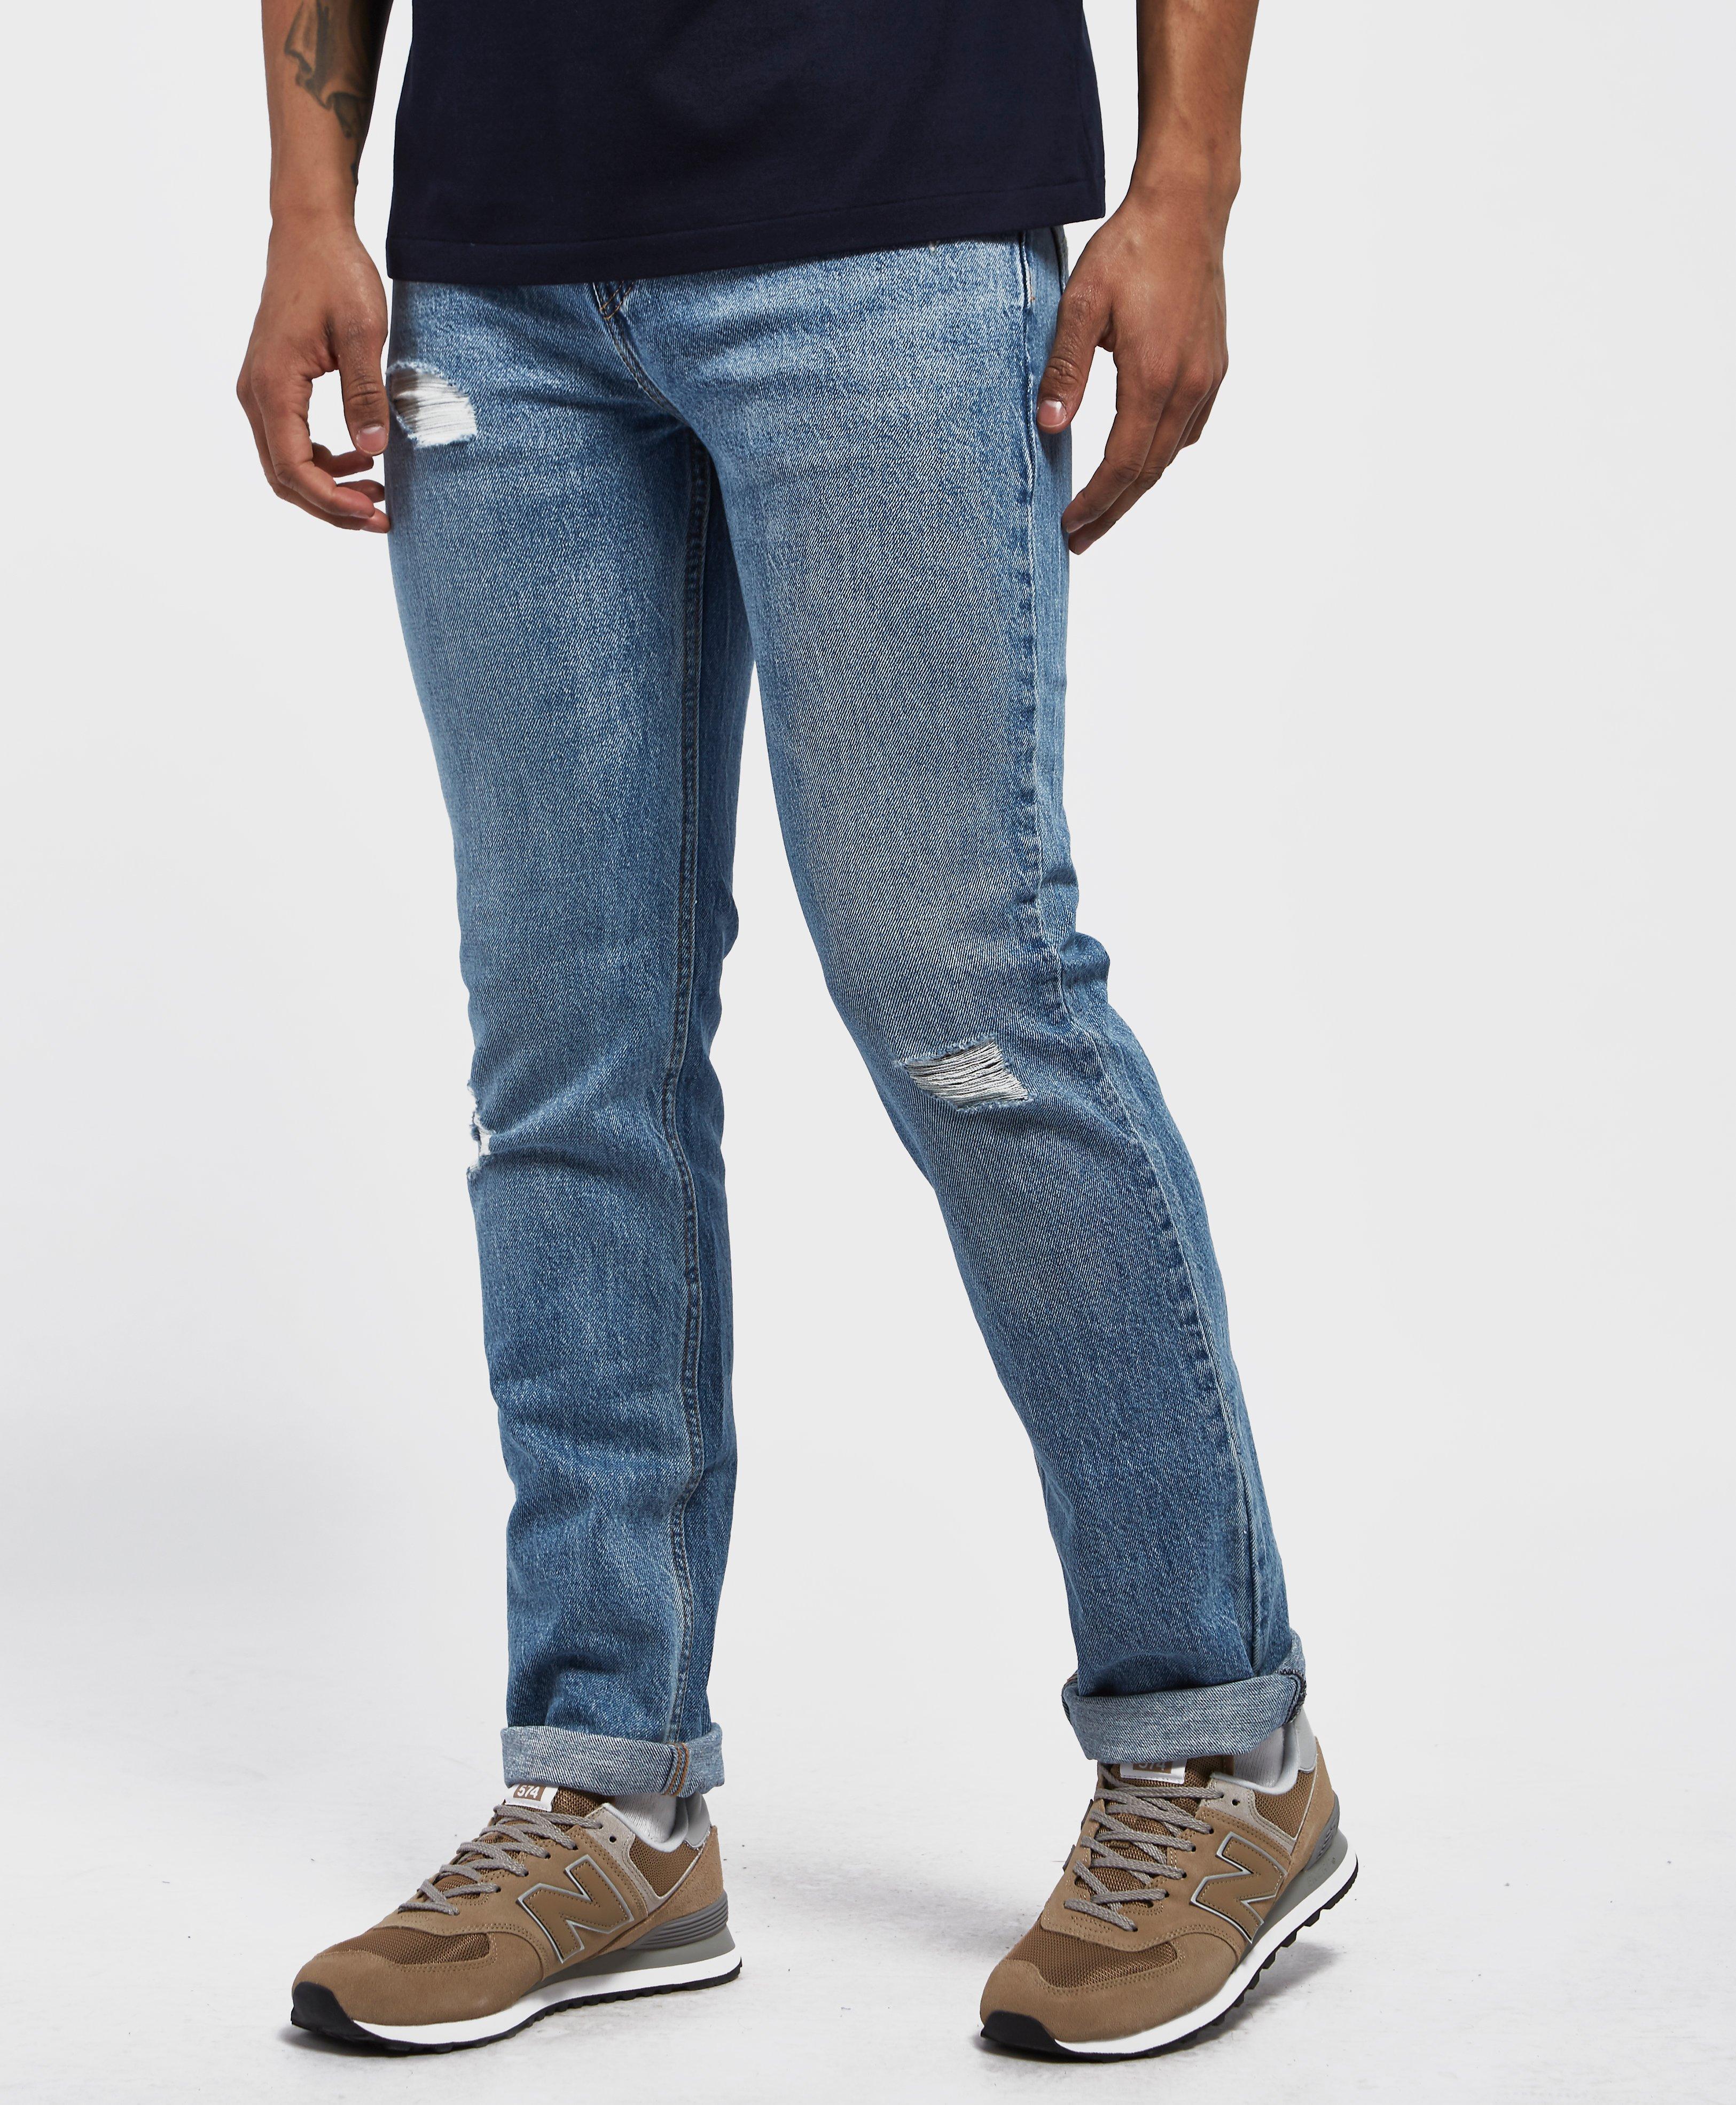 Lyst - Levi'S 511 Slim Toto Ripped Jeans - Online Exclusive in Blue for Men